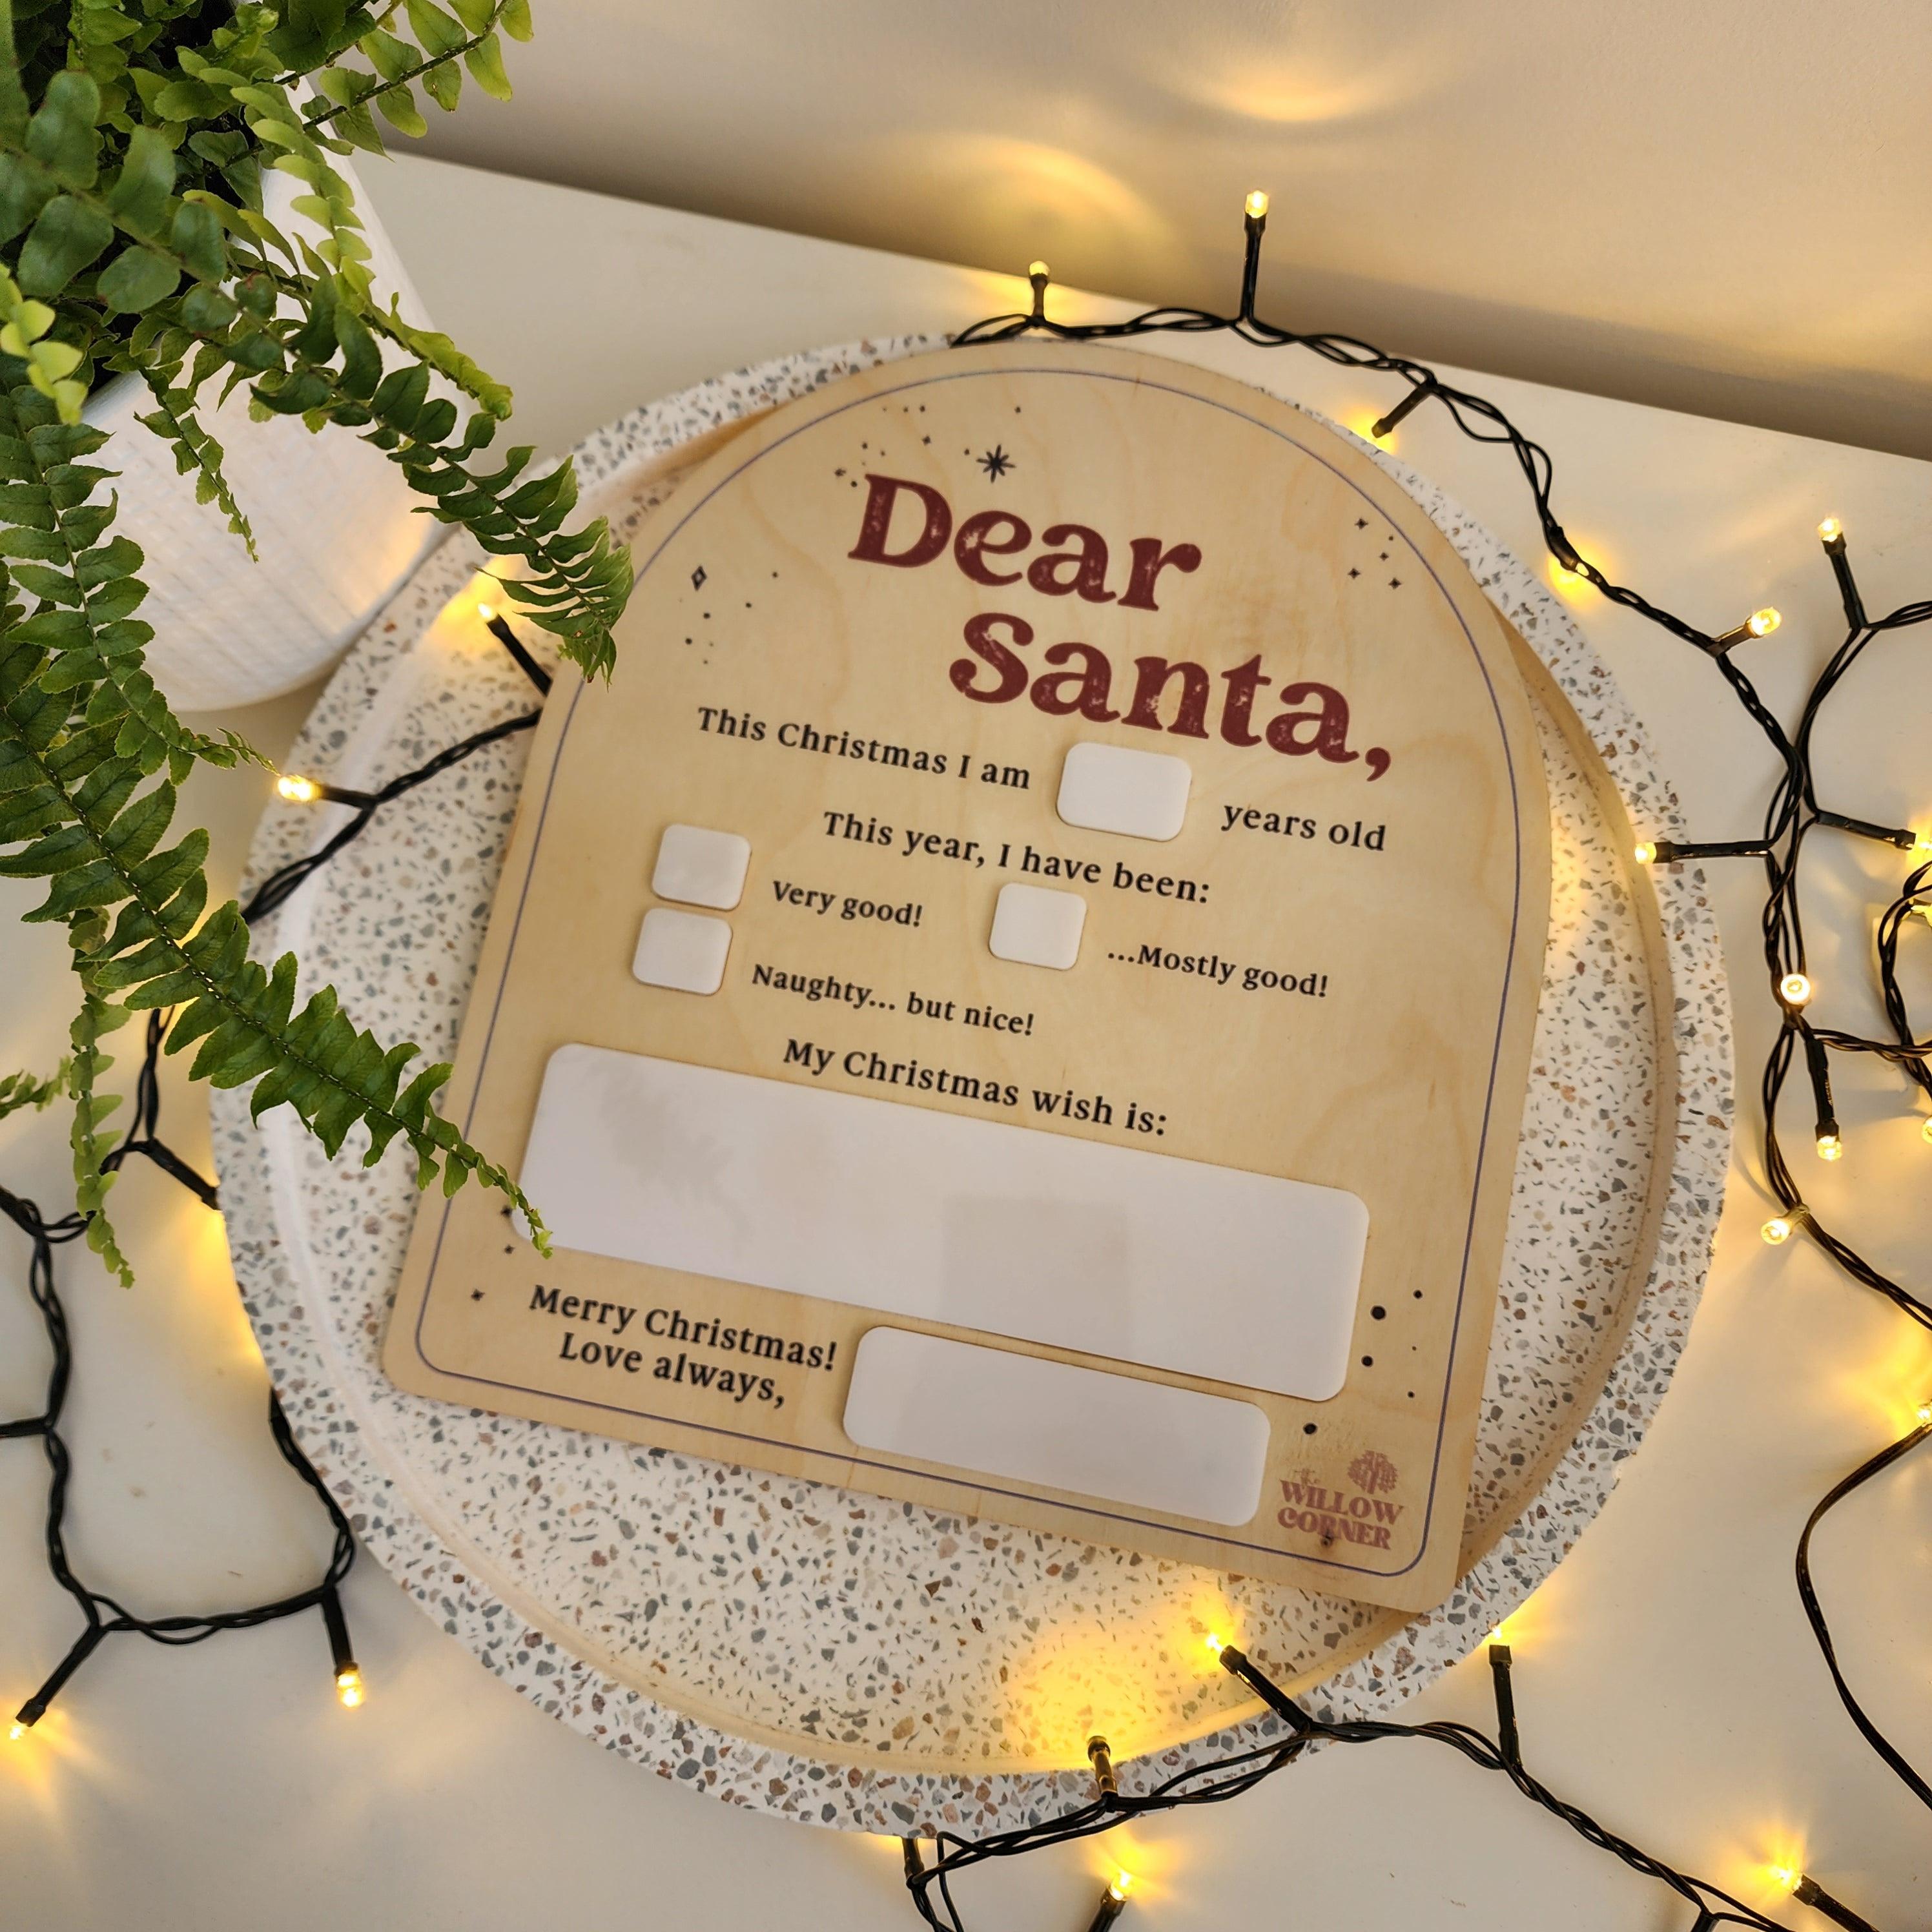 Dear Santa Wooden Arch Board - Reusable Letter to Santa Christmas Decoration - The Willow Corner